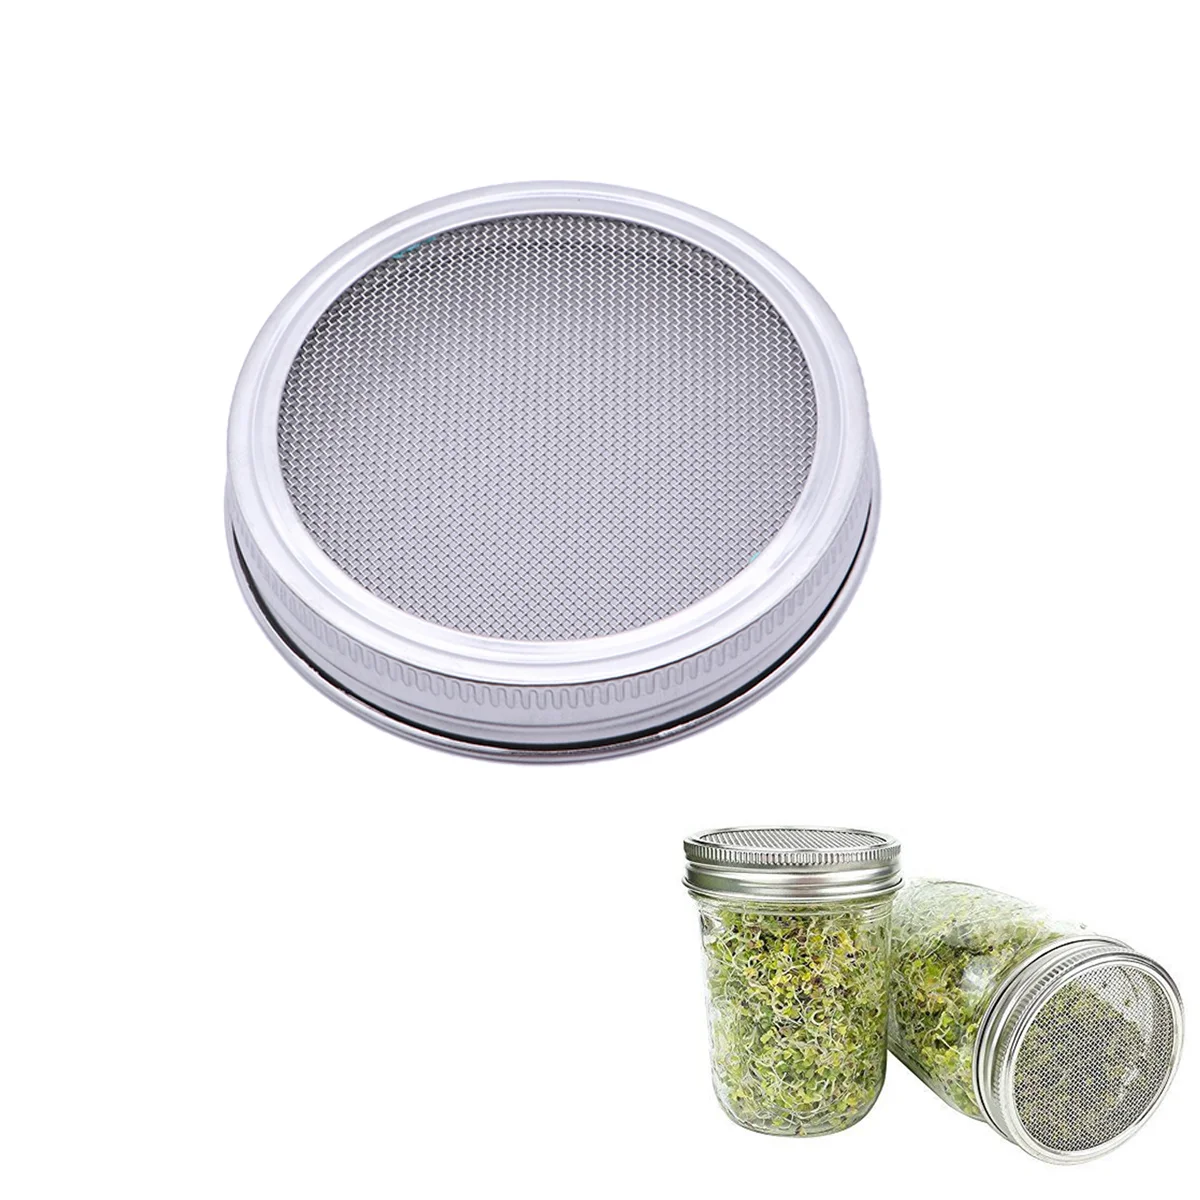 

Sprouting Lid Lids Jar Mason Screen Canning Jars Mesh Mouth Strainer Germination Sprouts Sprouter Bean Regular Wide Steel Metal